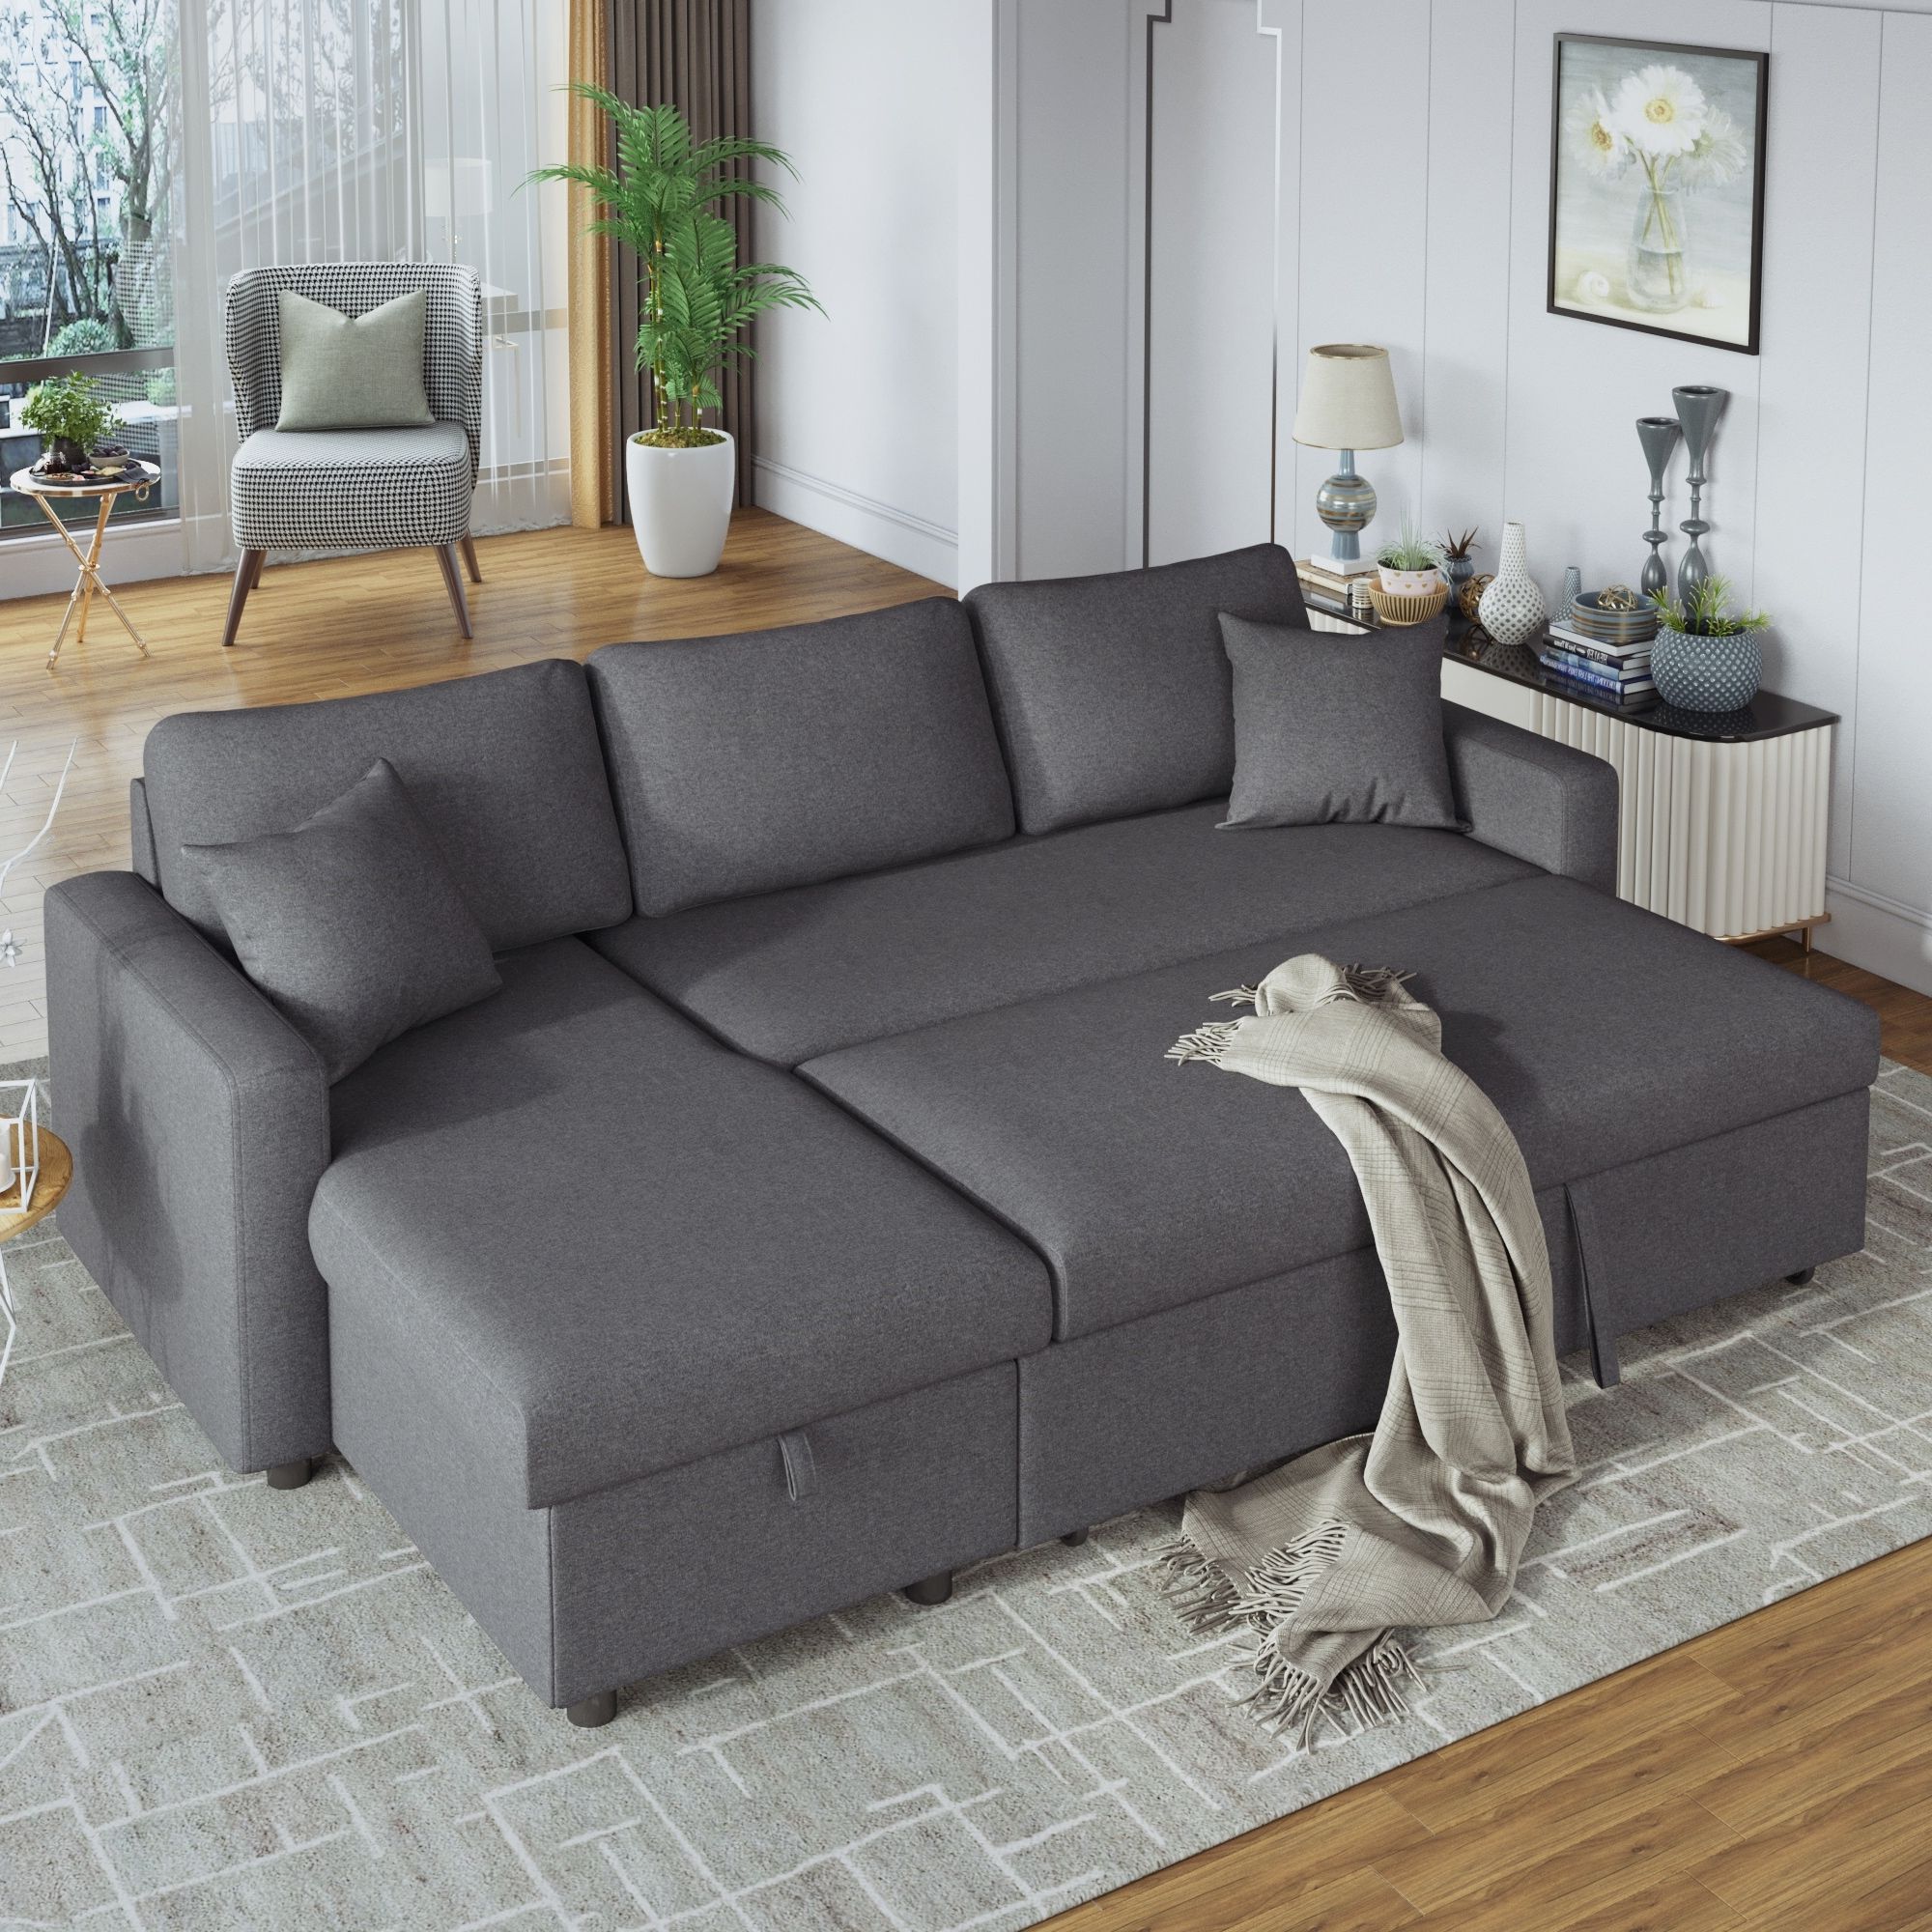 L Shape Sectional Sofa Modern Convertible Upholstered Twin Sofa Bed Sleeper  With Storage Sofa Chaise And 2 Tossing Cushions – – 36781665 Intended For U Shaped Sectional Sofa With Pull Out Bed (Gallery 17 of 20)